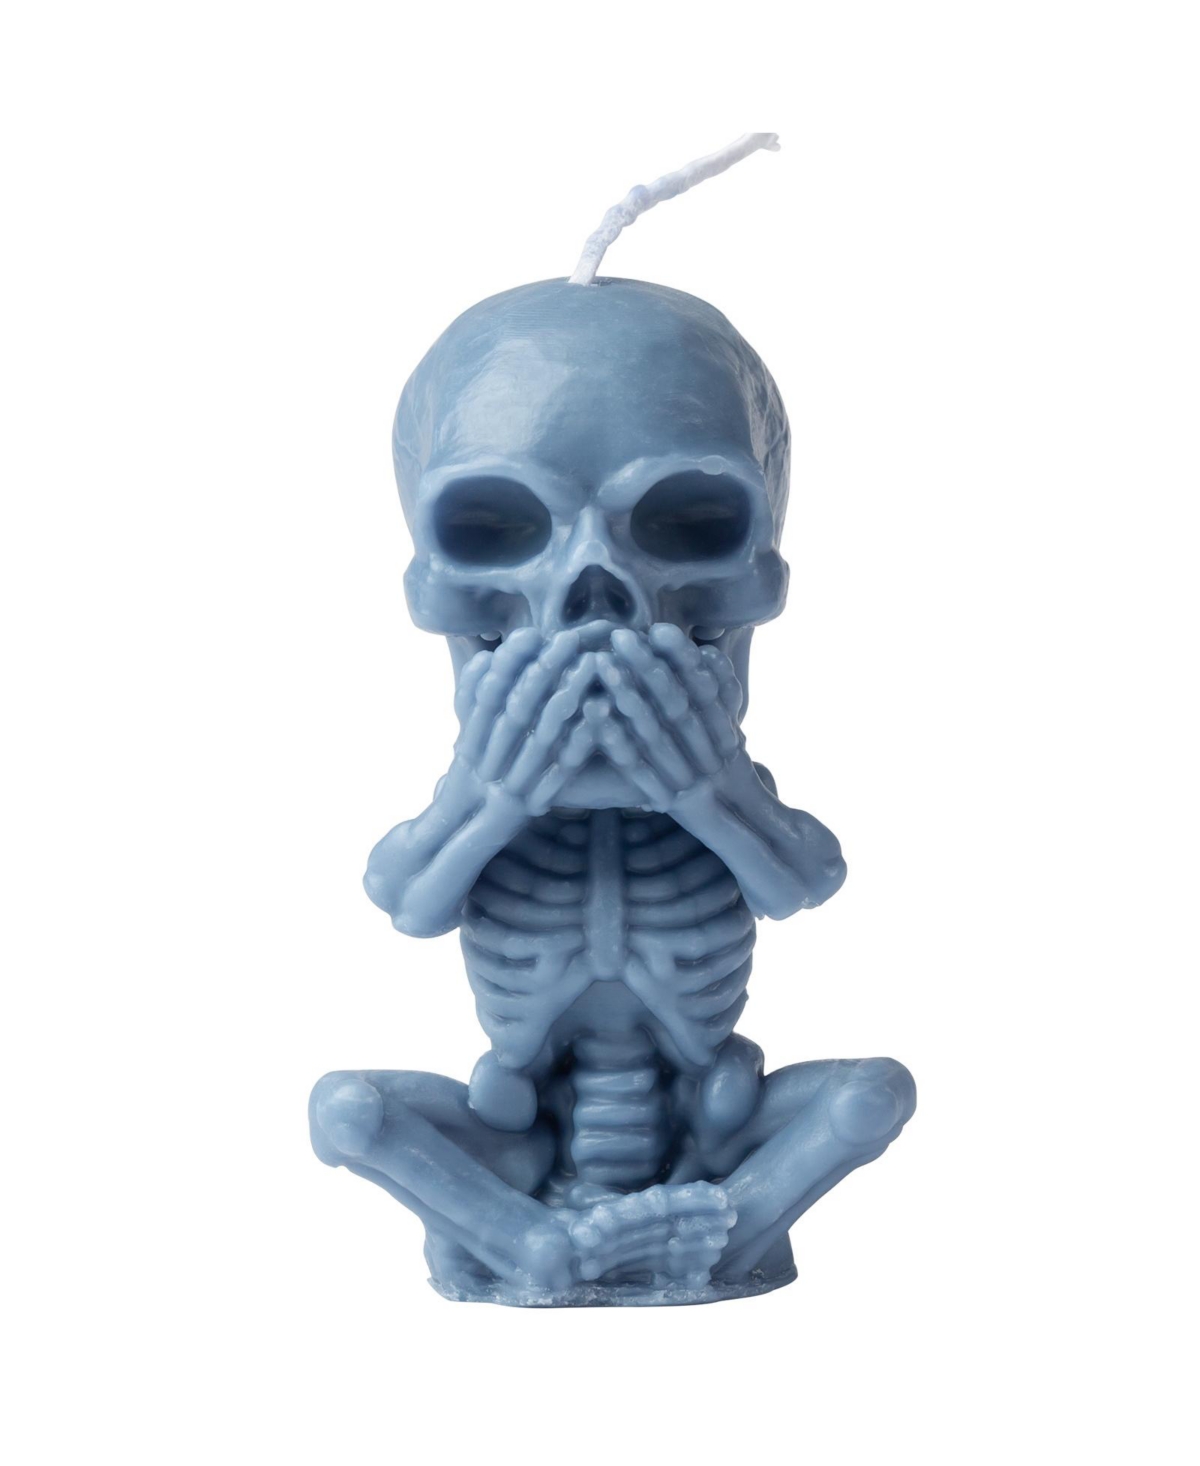 Skull Covering Mouth Creative Candle for Spooky Halloween Decoration - Blue